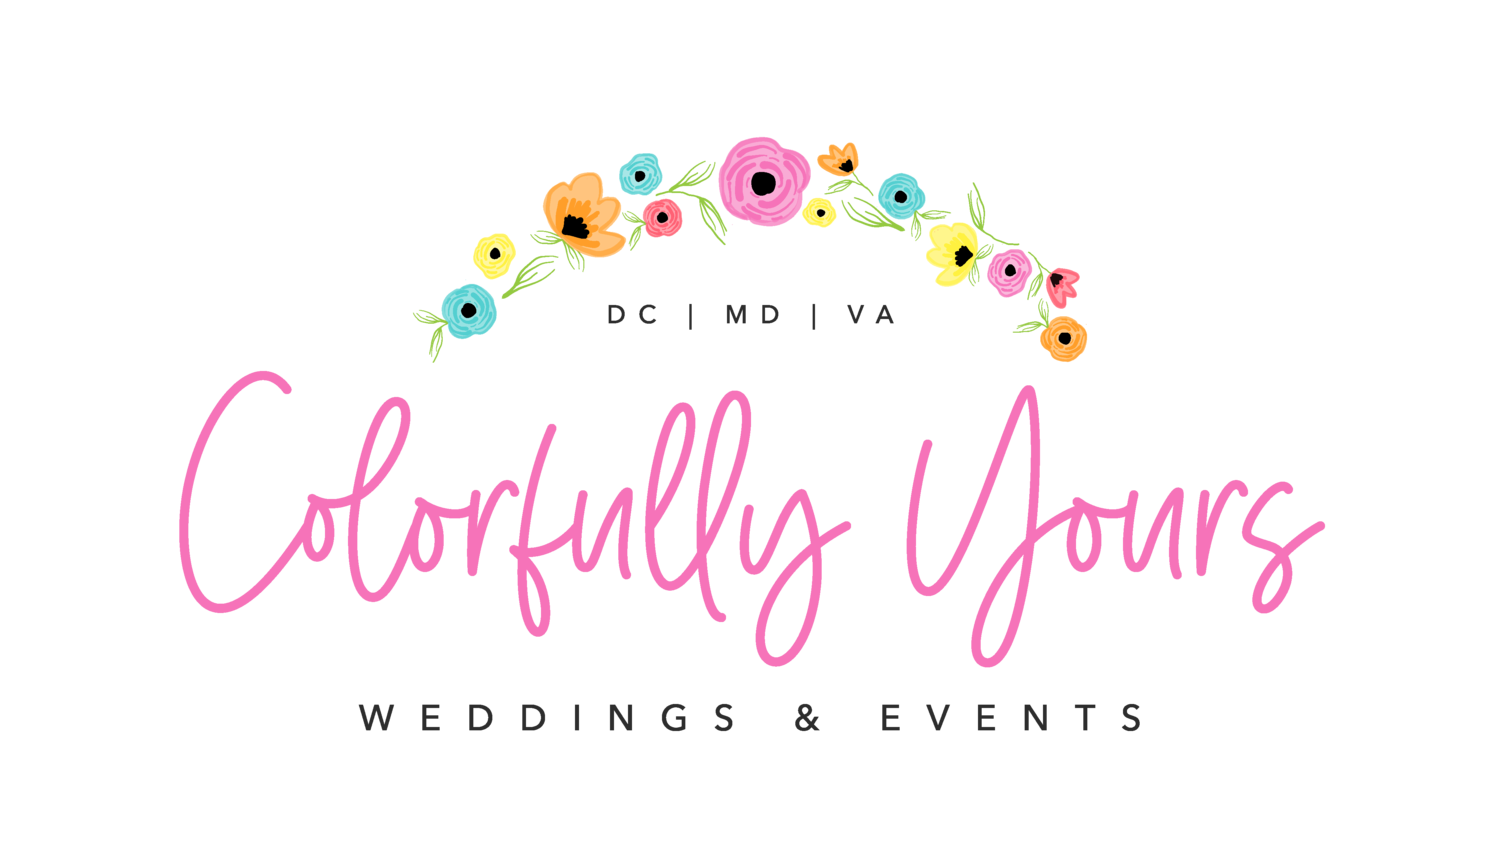 Colorfully Yours Weddings & Events